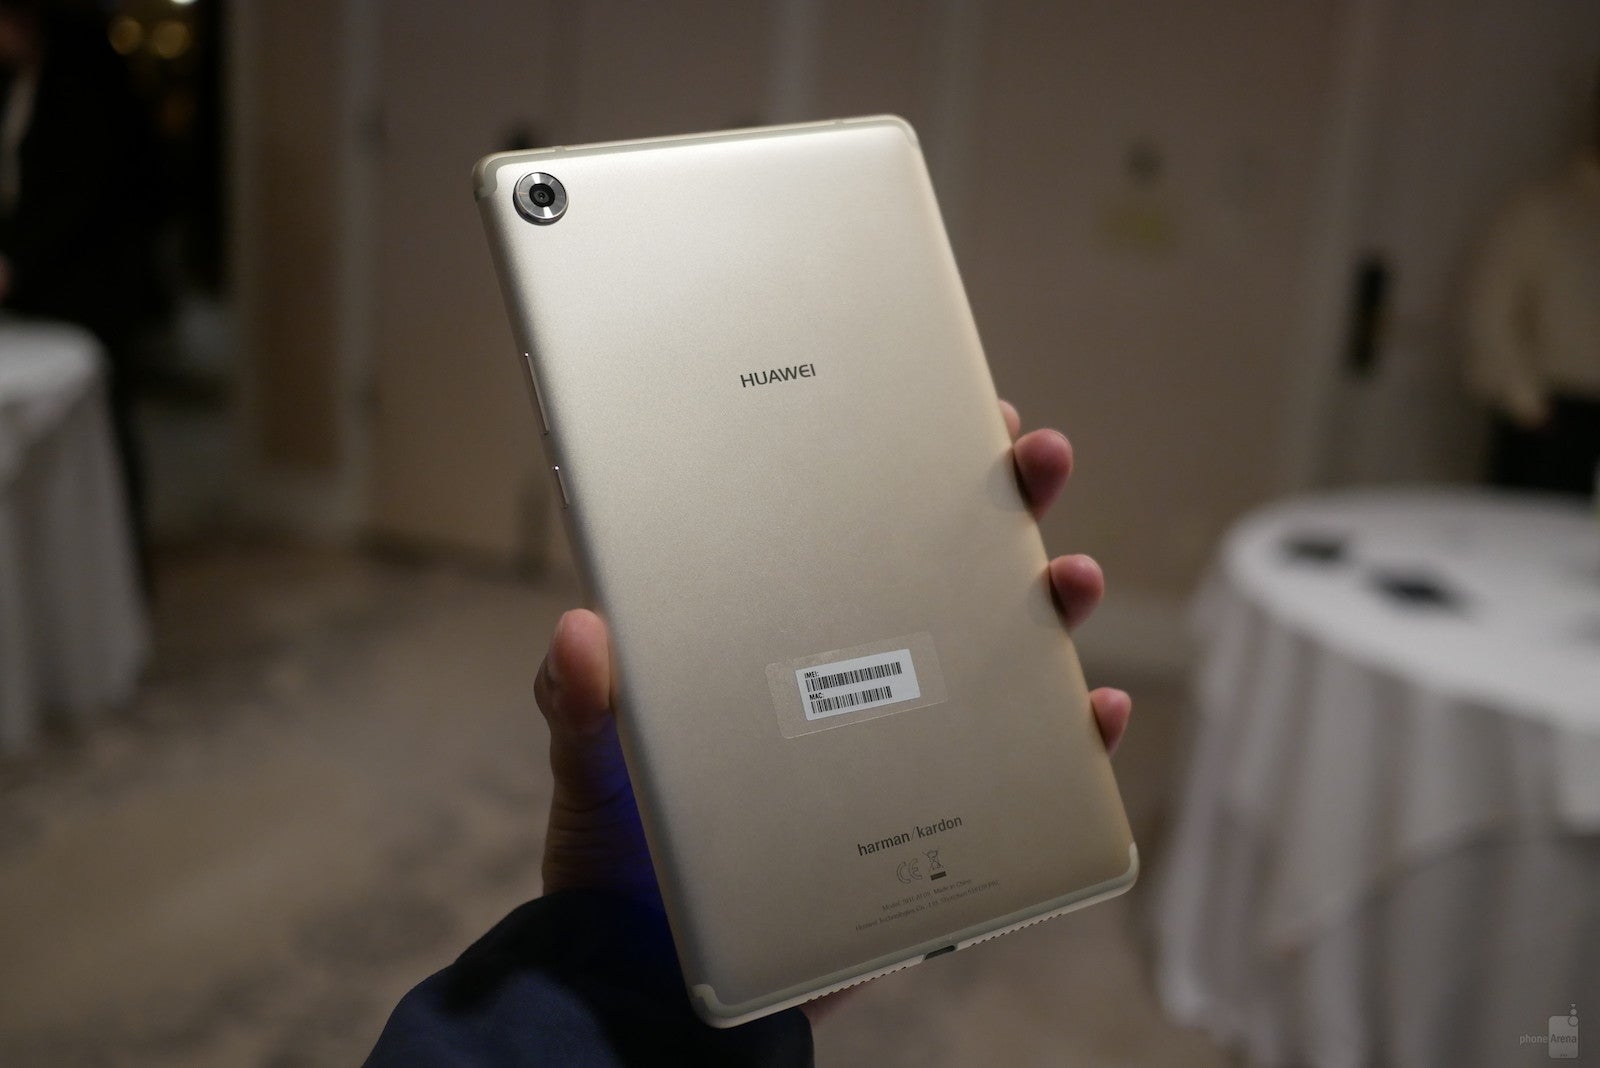 Huawei MediaPad M5 and M5 Pro Hands-On: Are Android tablets on the comeback?